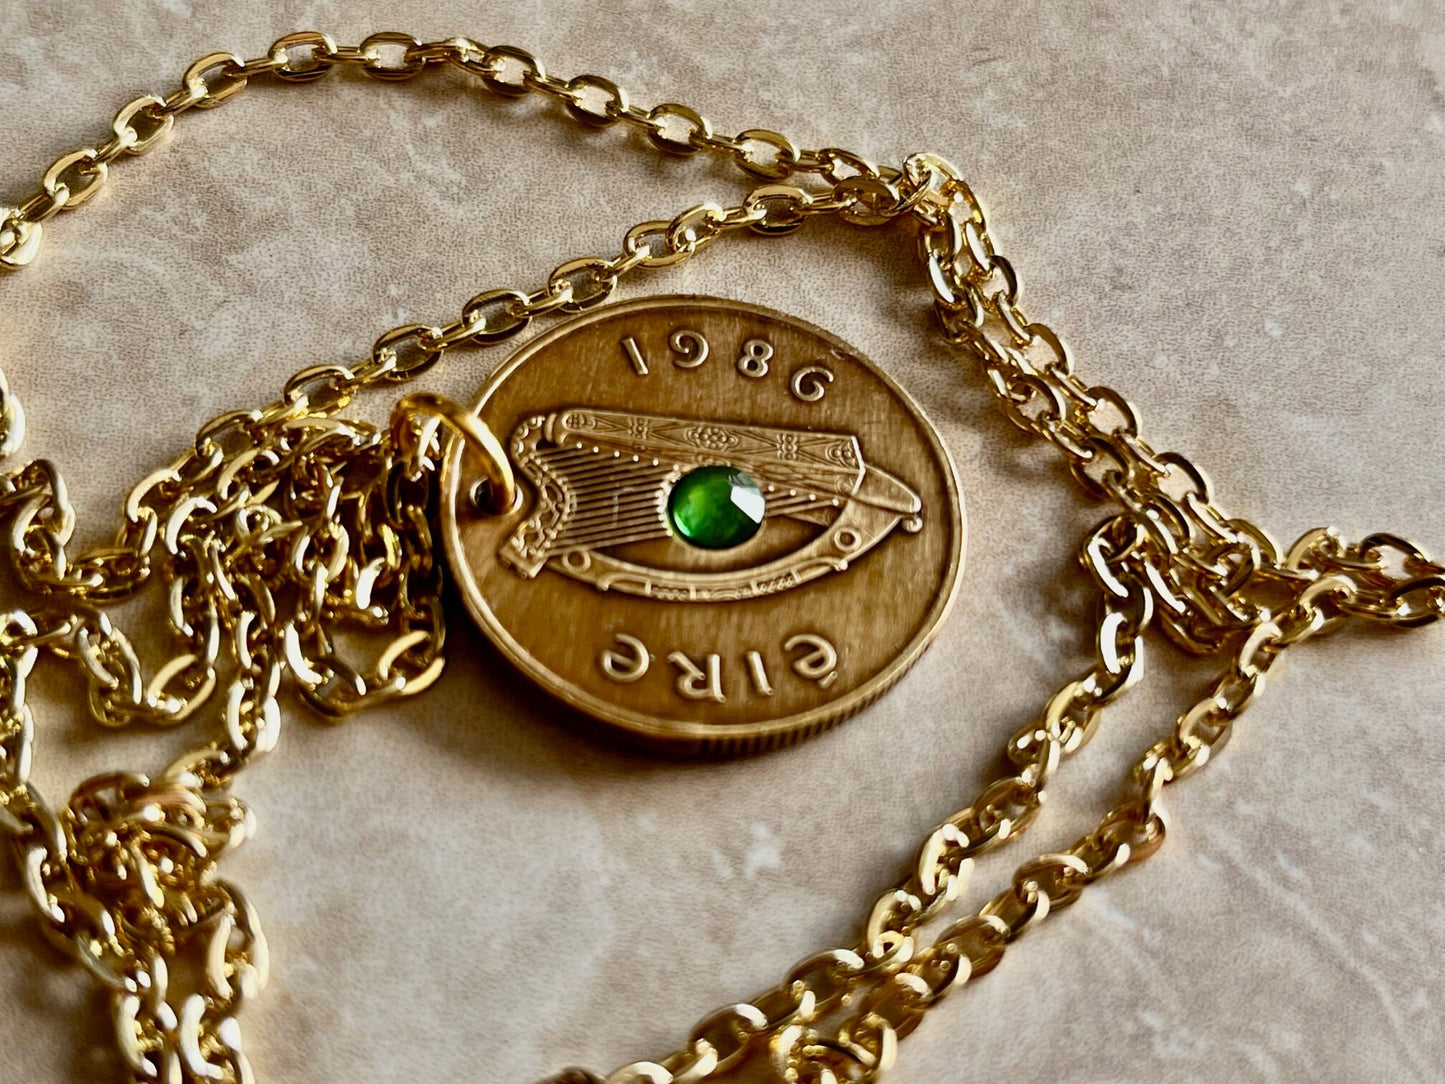 Ireland Coin Pendant 20 Pence Irish Harp Coin Necklace Rhinestone Gift For Friend Coin Charm Gift For Him, Her, Coin Collector, World Coins